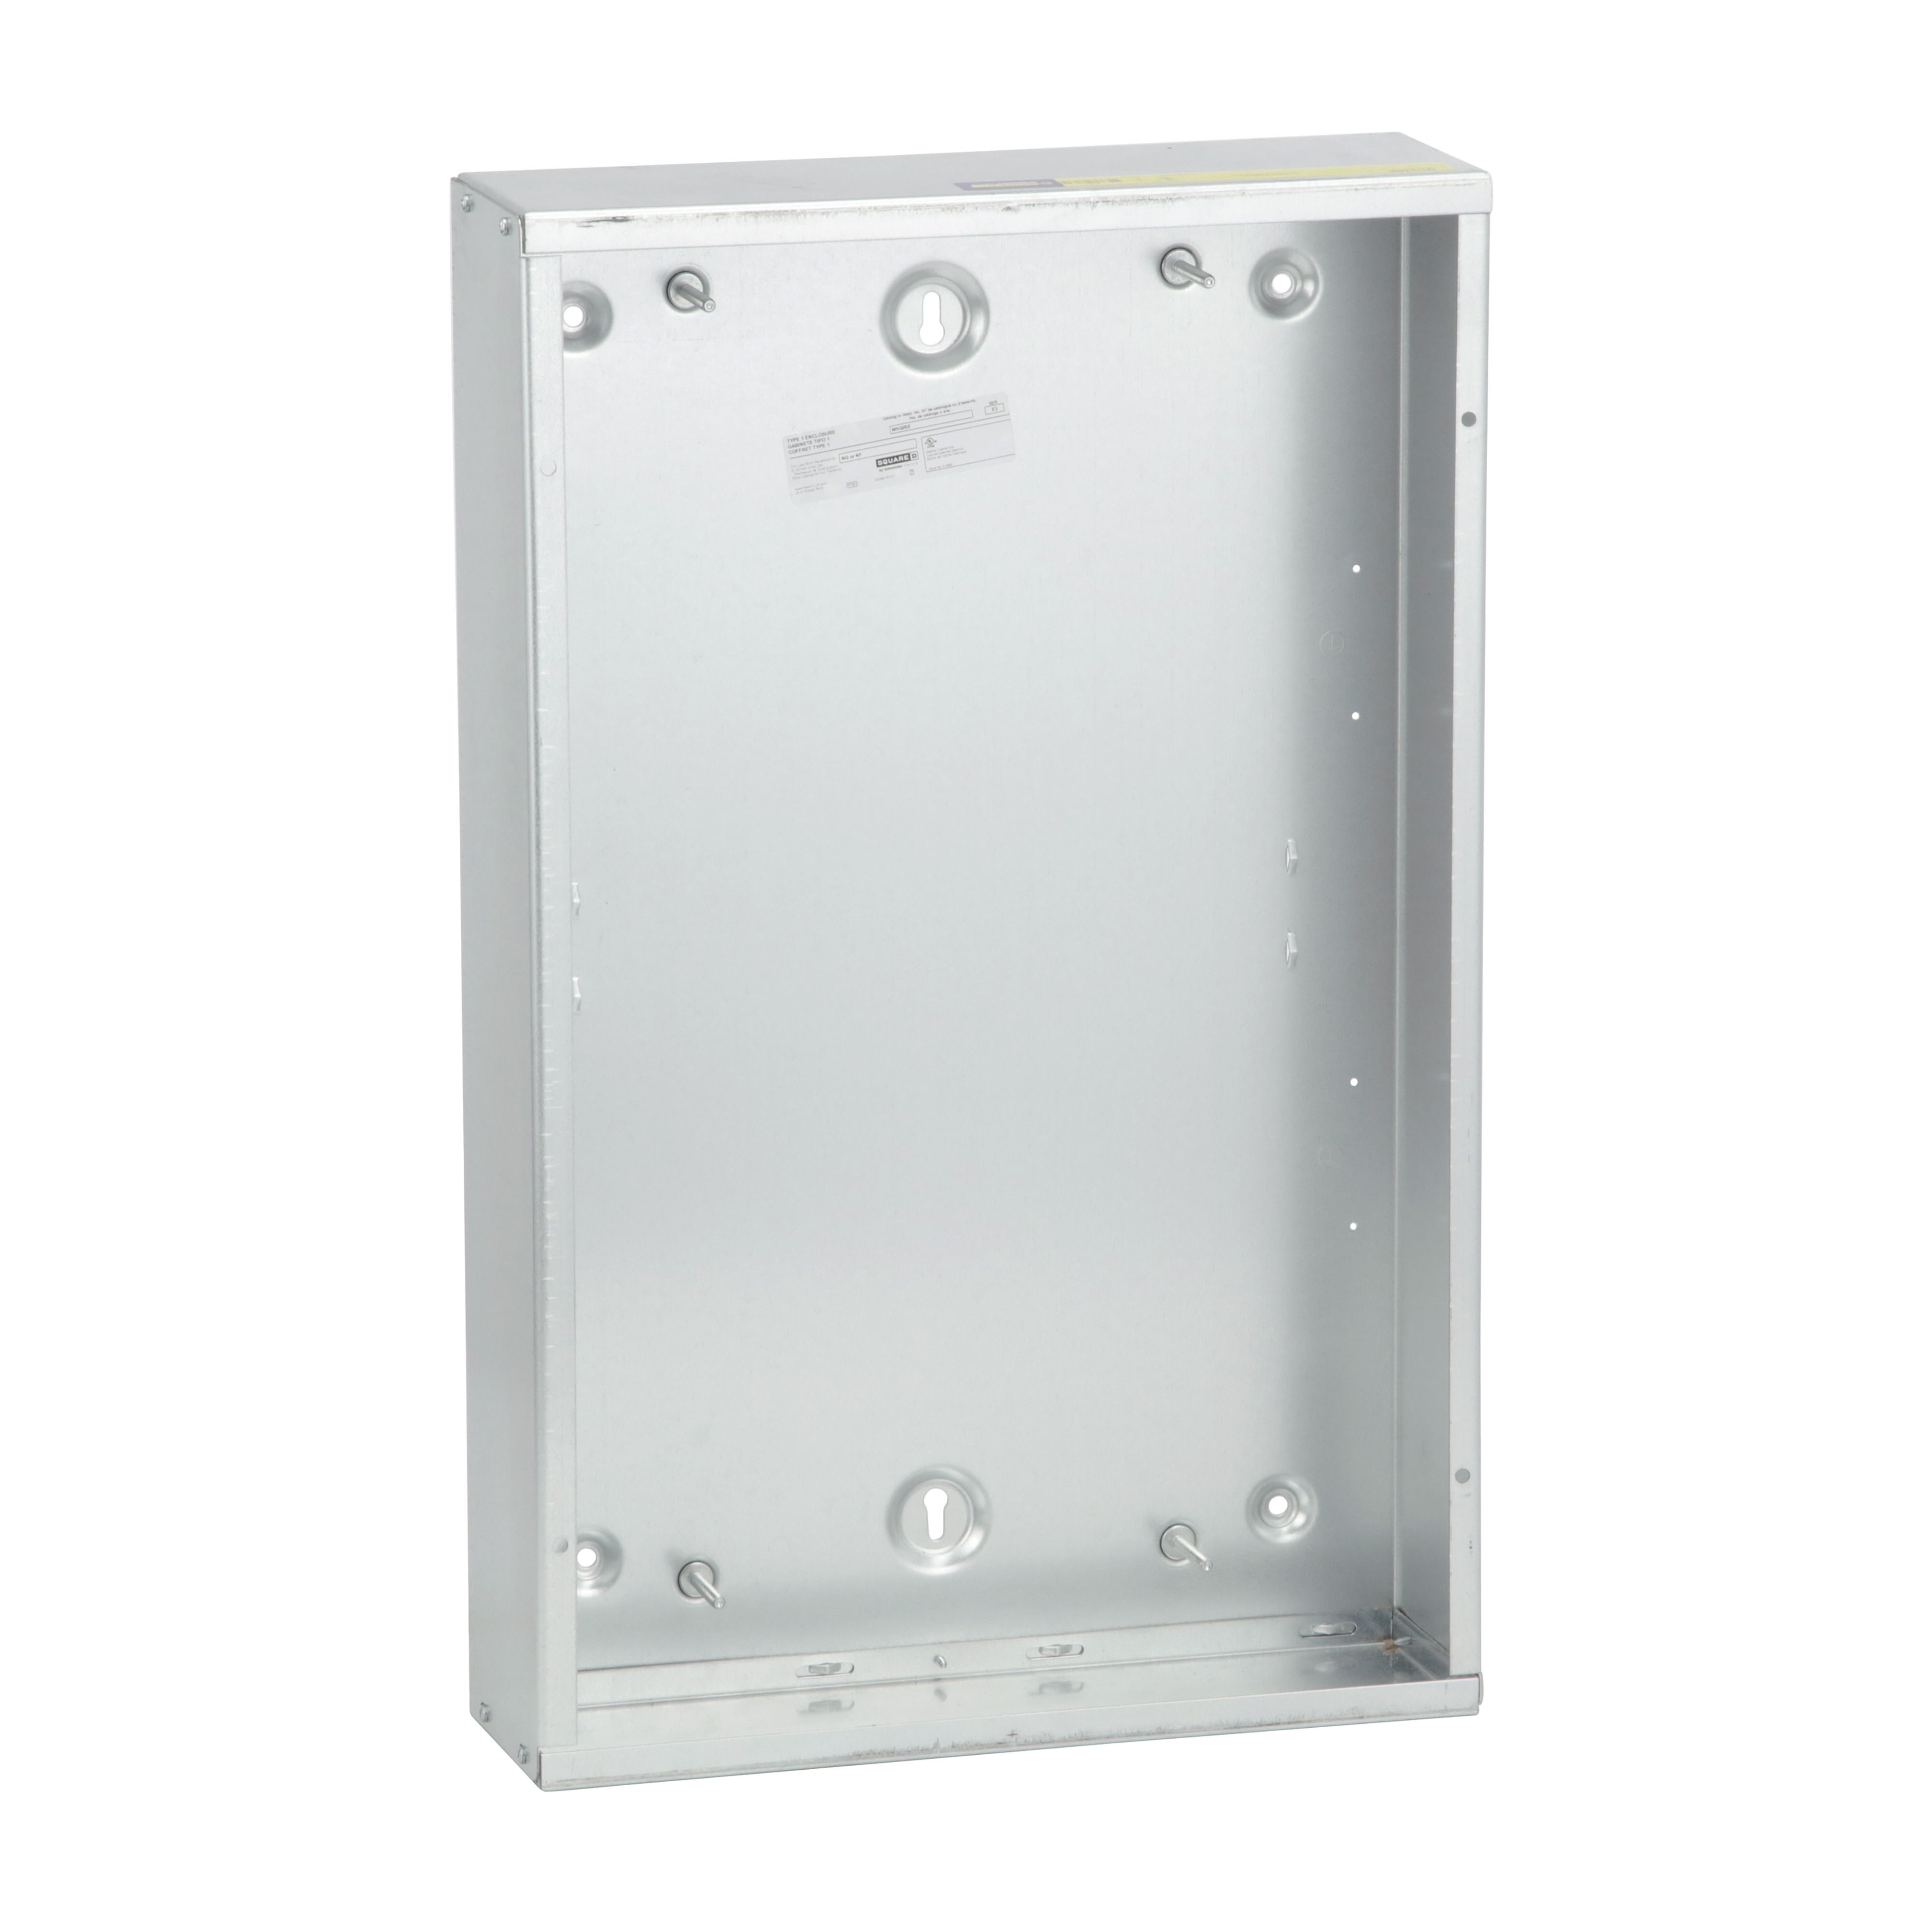 Enclosure box, NQ and NF panelboards, NEMA 1, blank end walls, 20in W x 32in H x 5.75in D